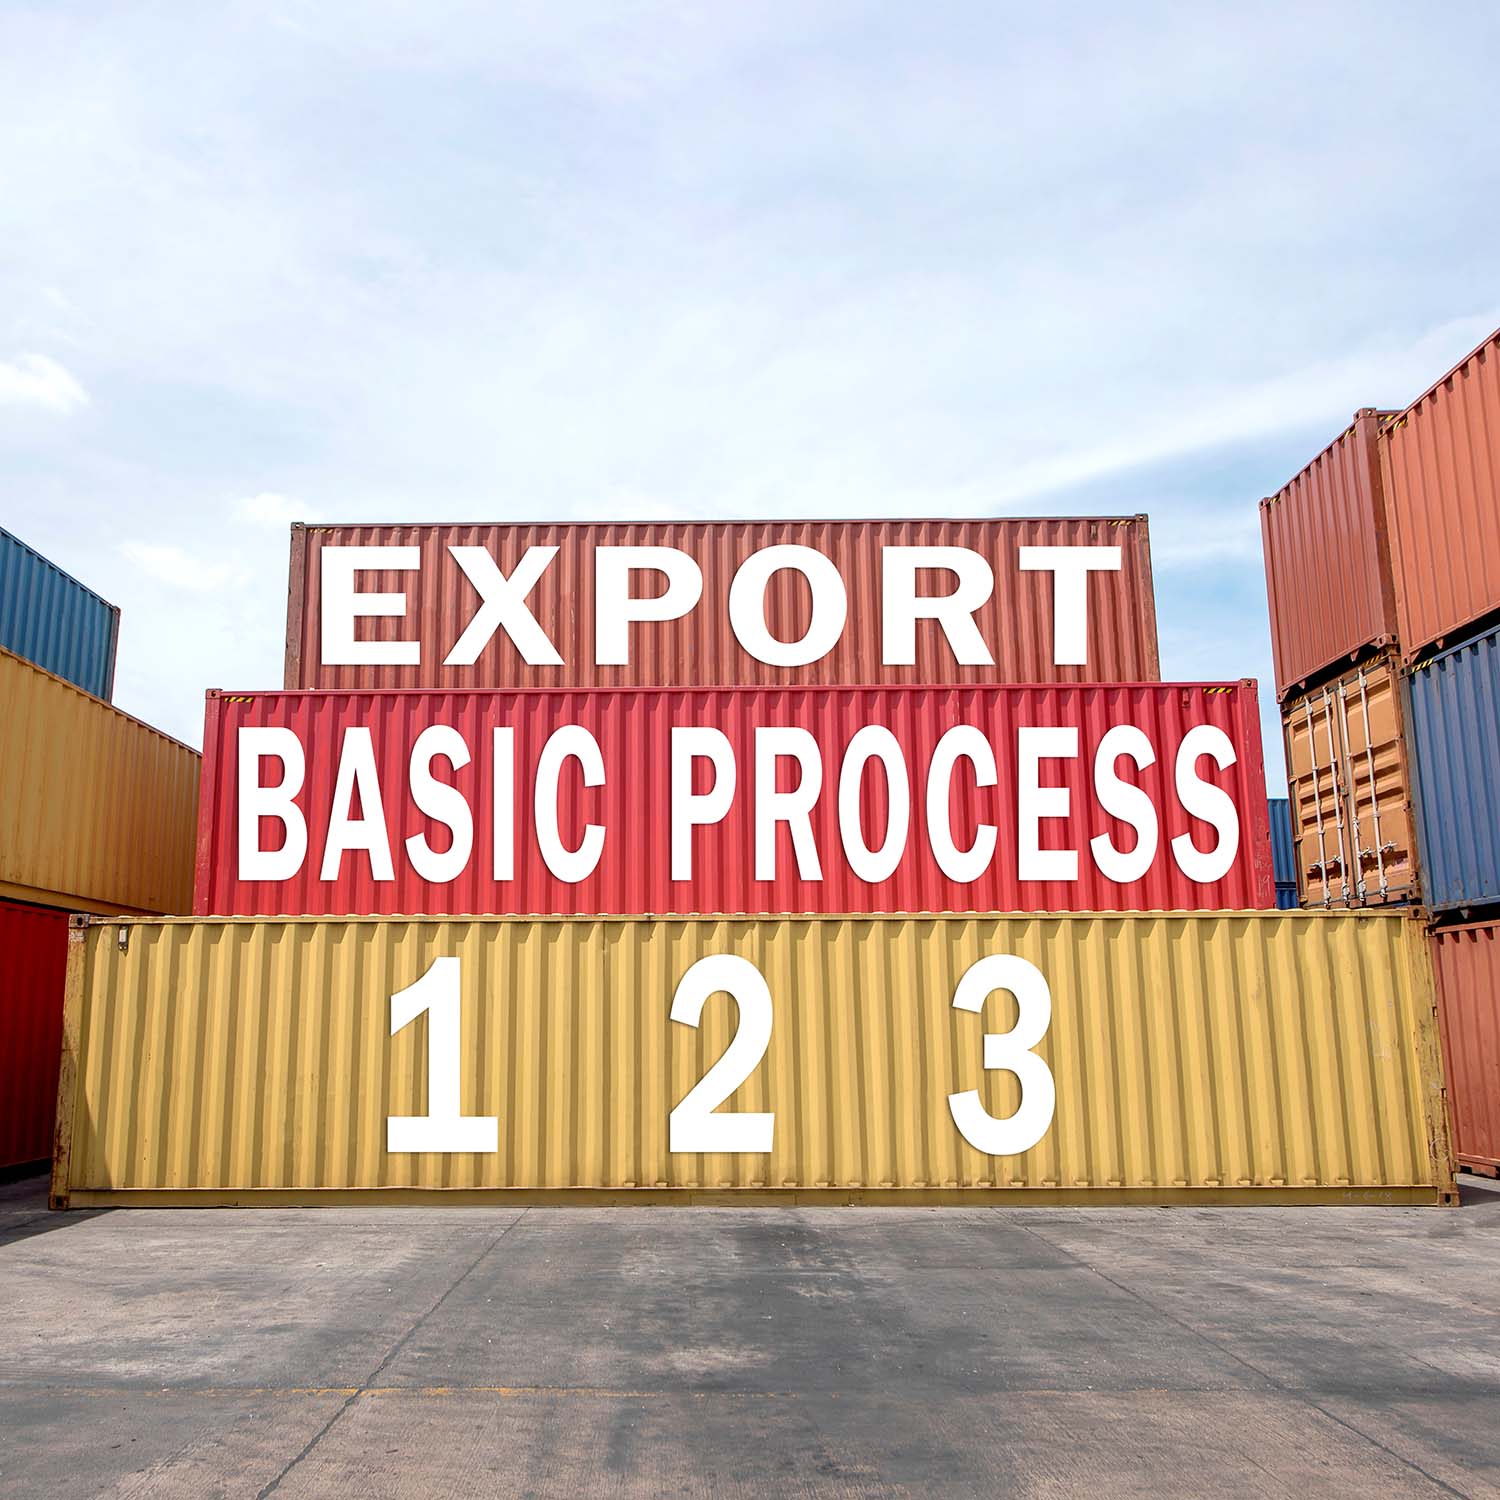 The process for exporting basic goods is a series of straightforward, sequential steps.